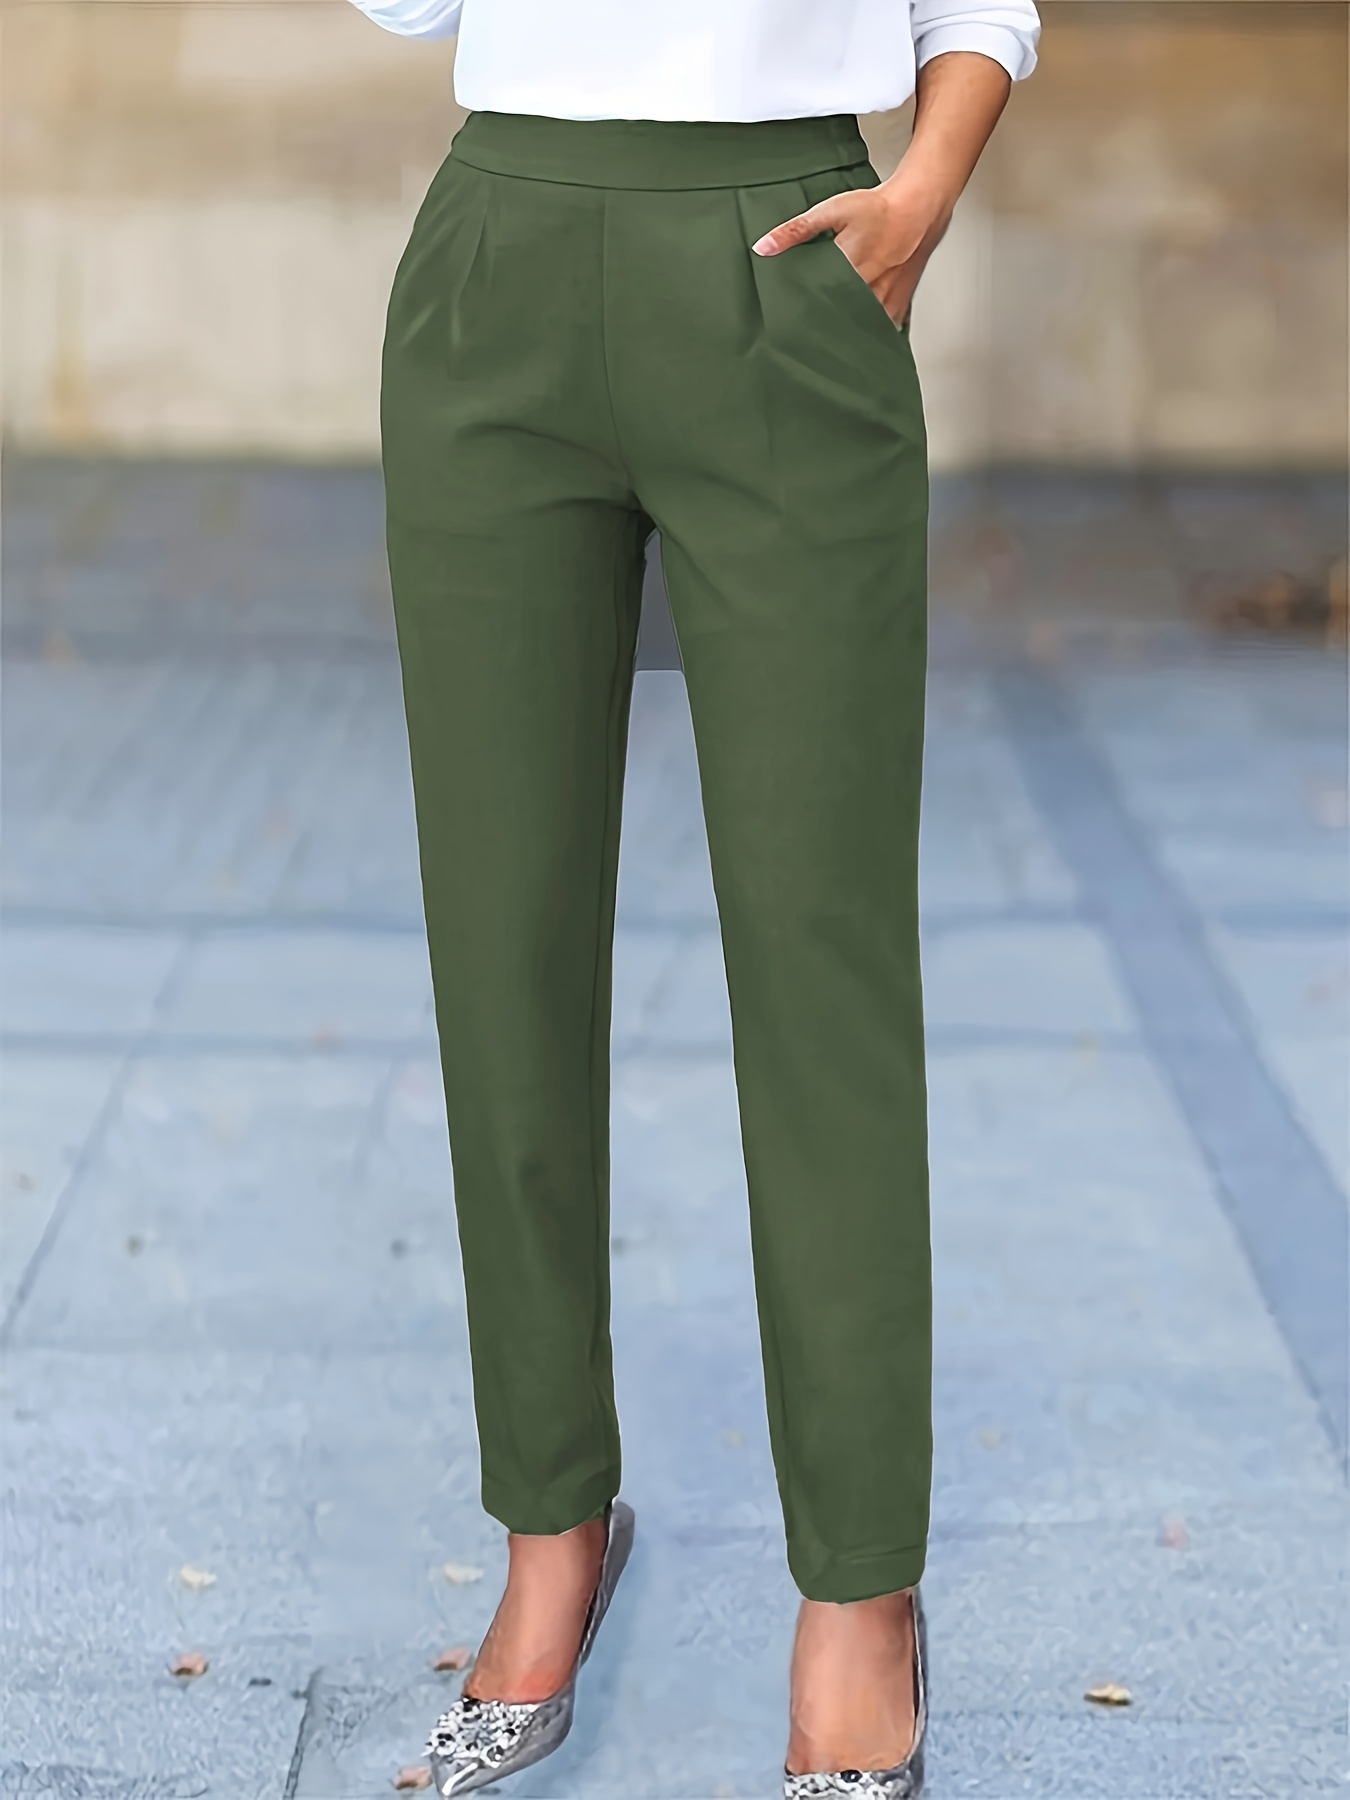 Solid Drawstring Waist Pants, Casual Elastic Bottom Pants For Spring &  Summer, Women's Clothing